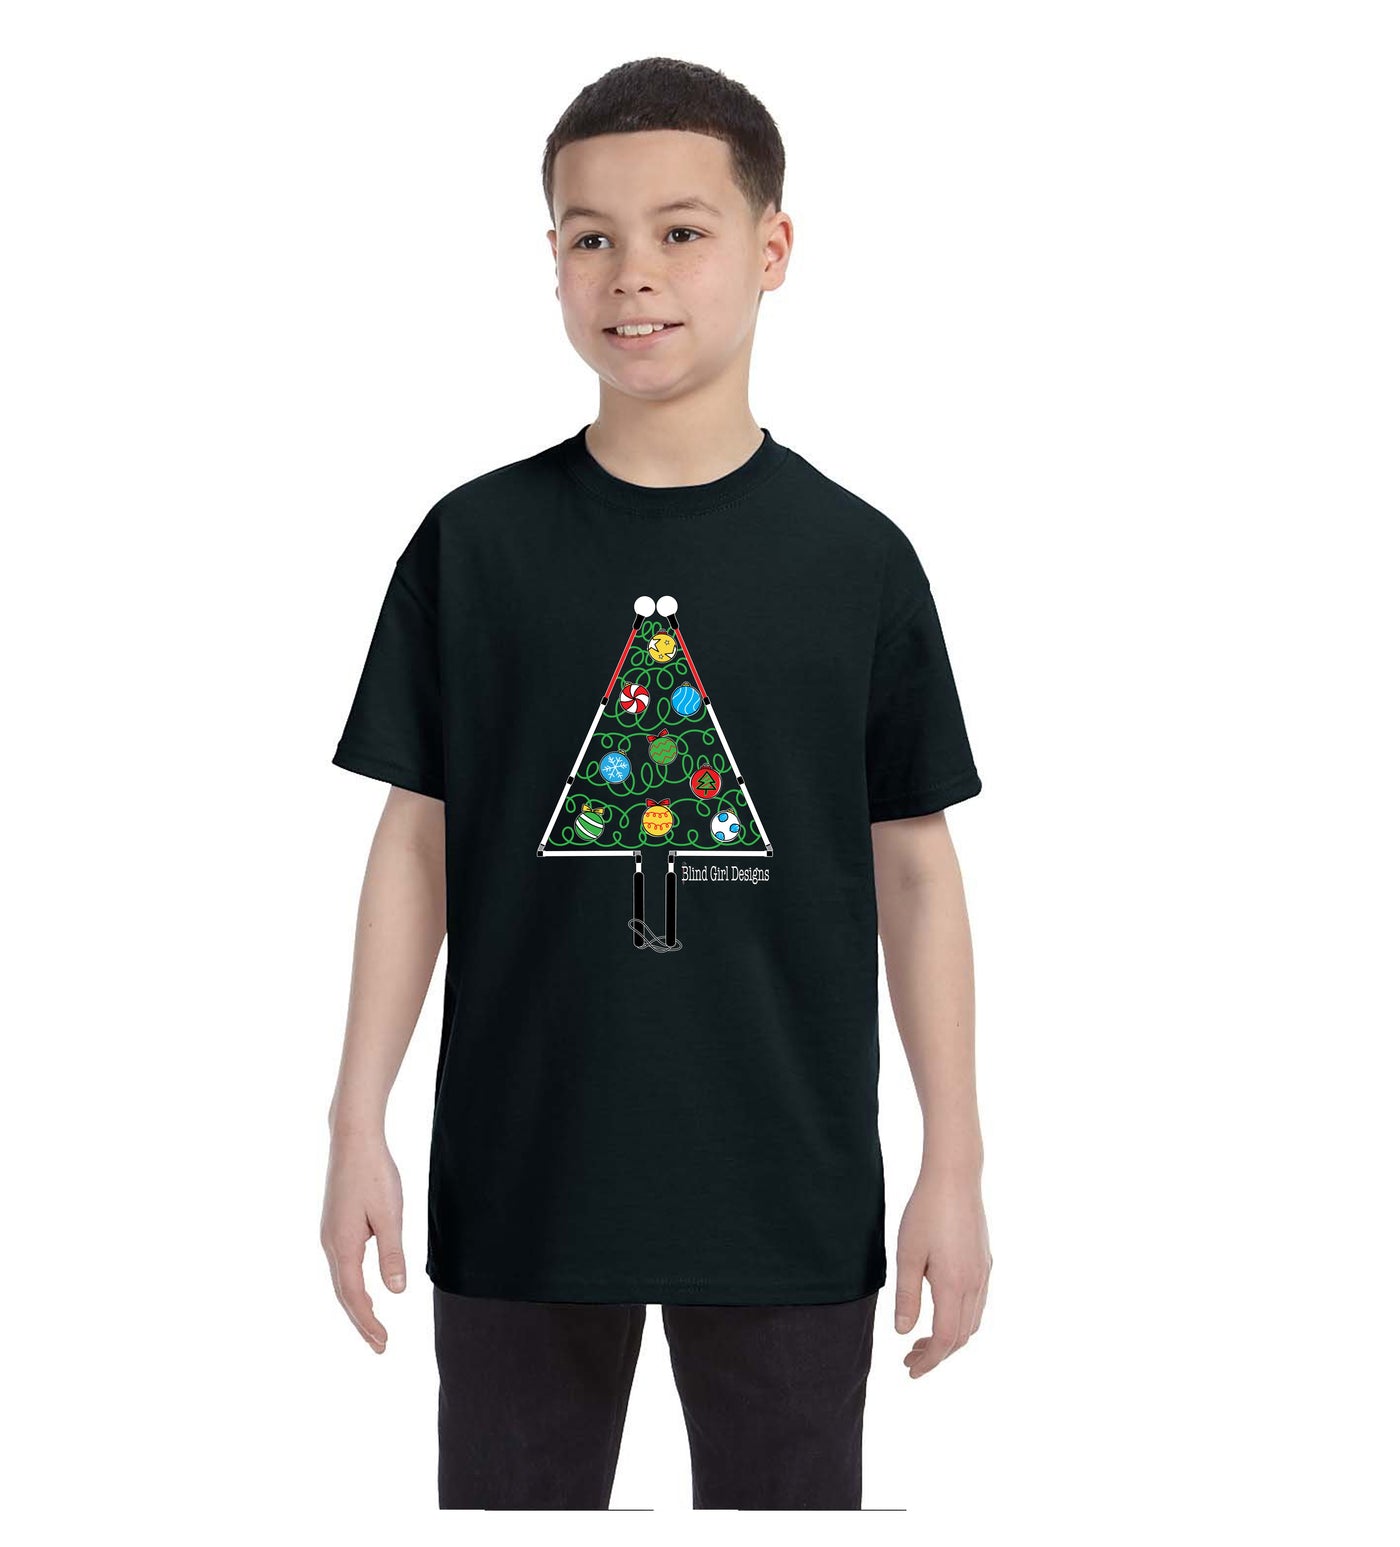 Kids and Toddlers Christmas Tree White Cane T-Shirt - Black